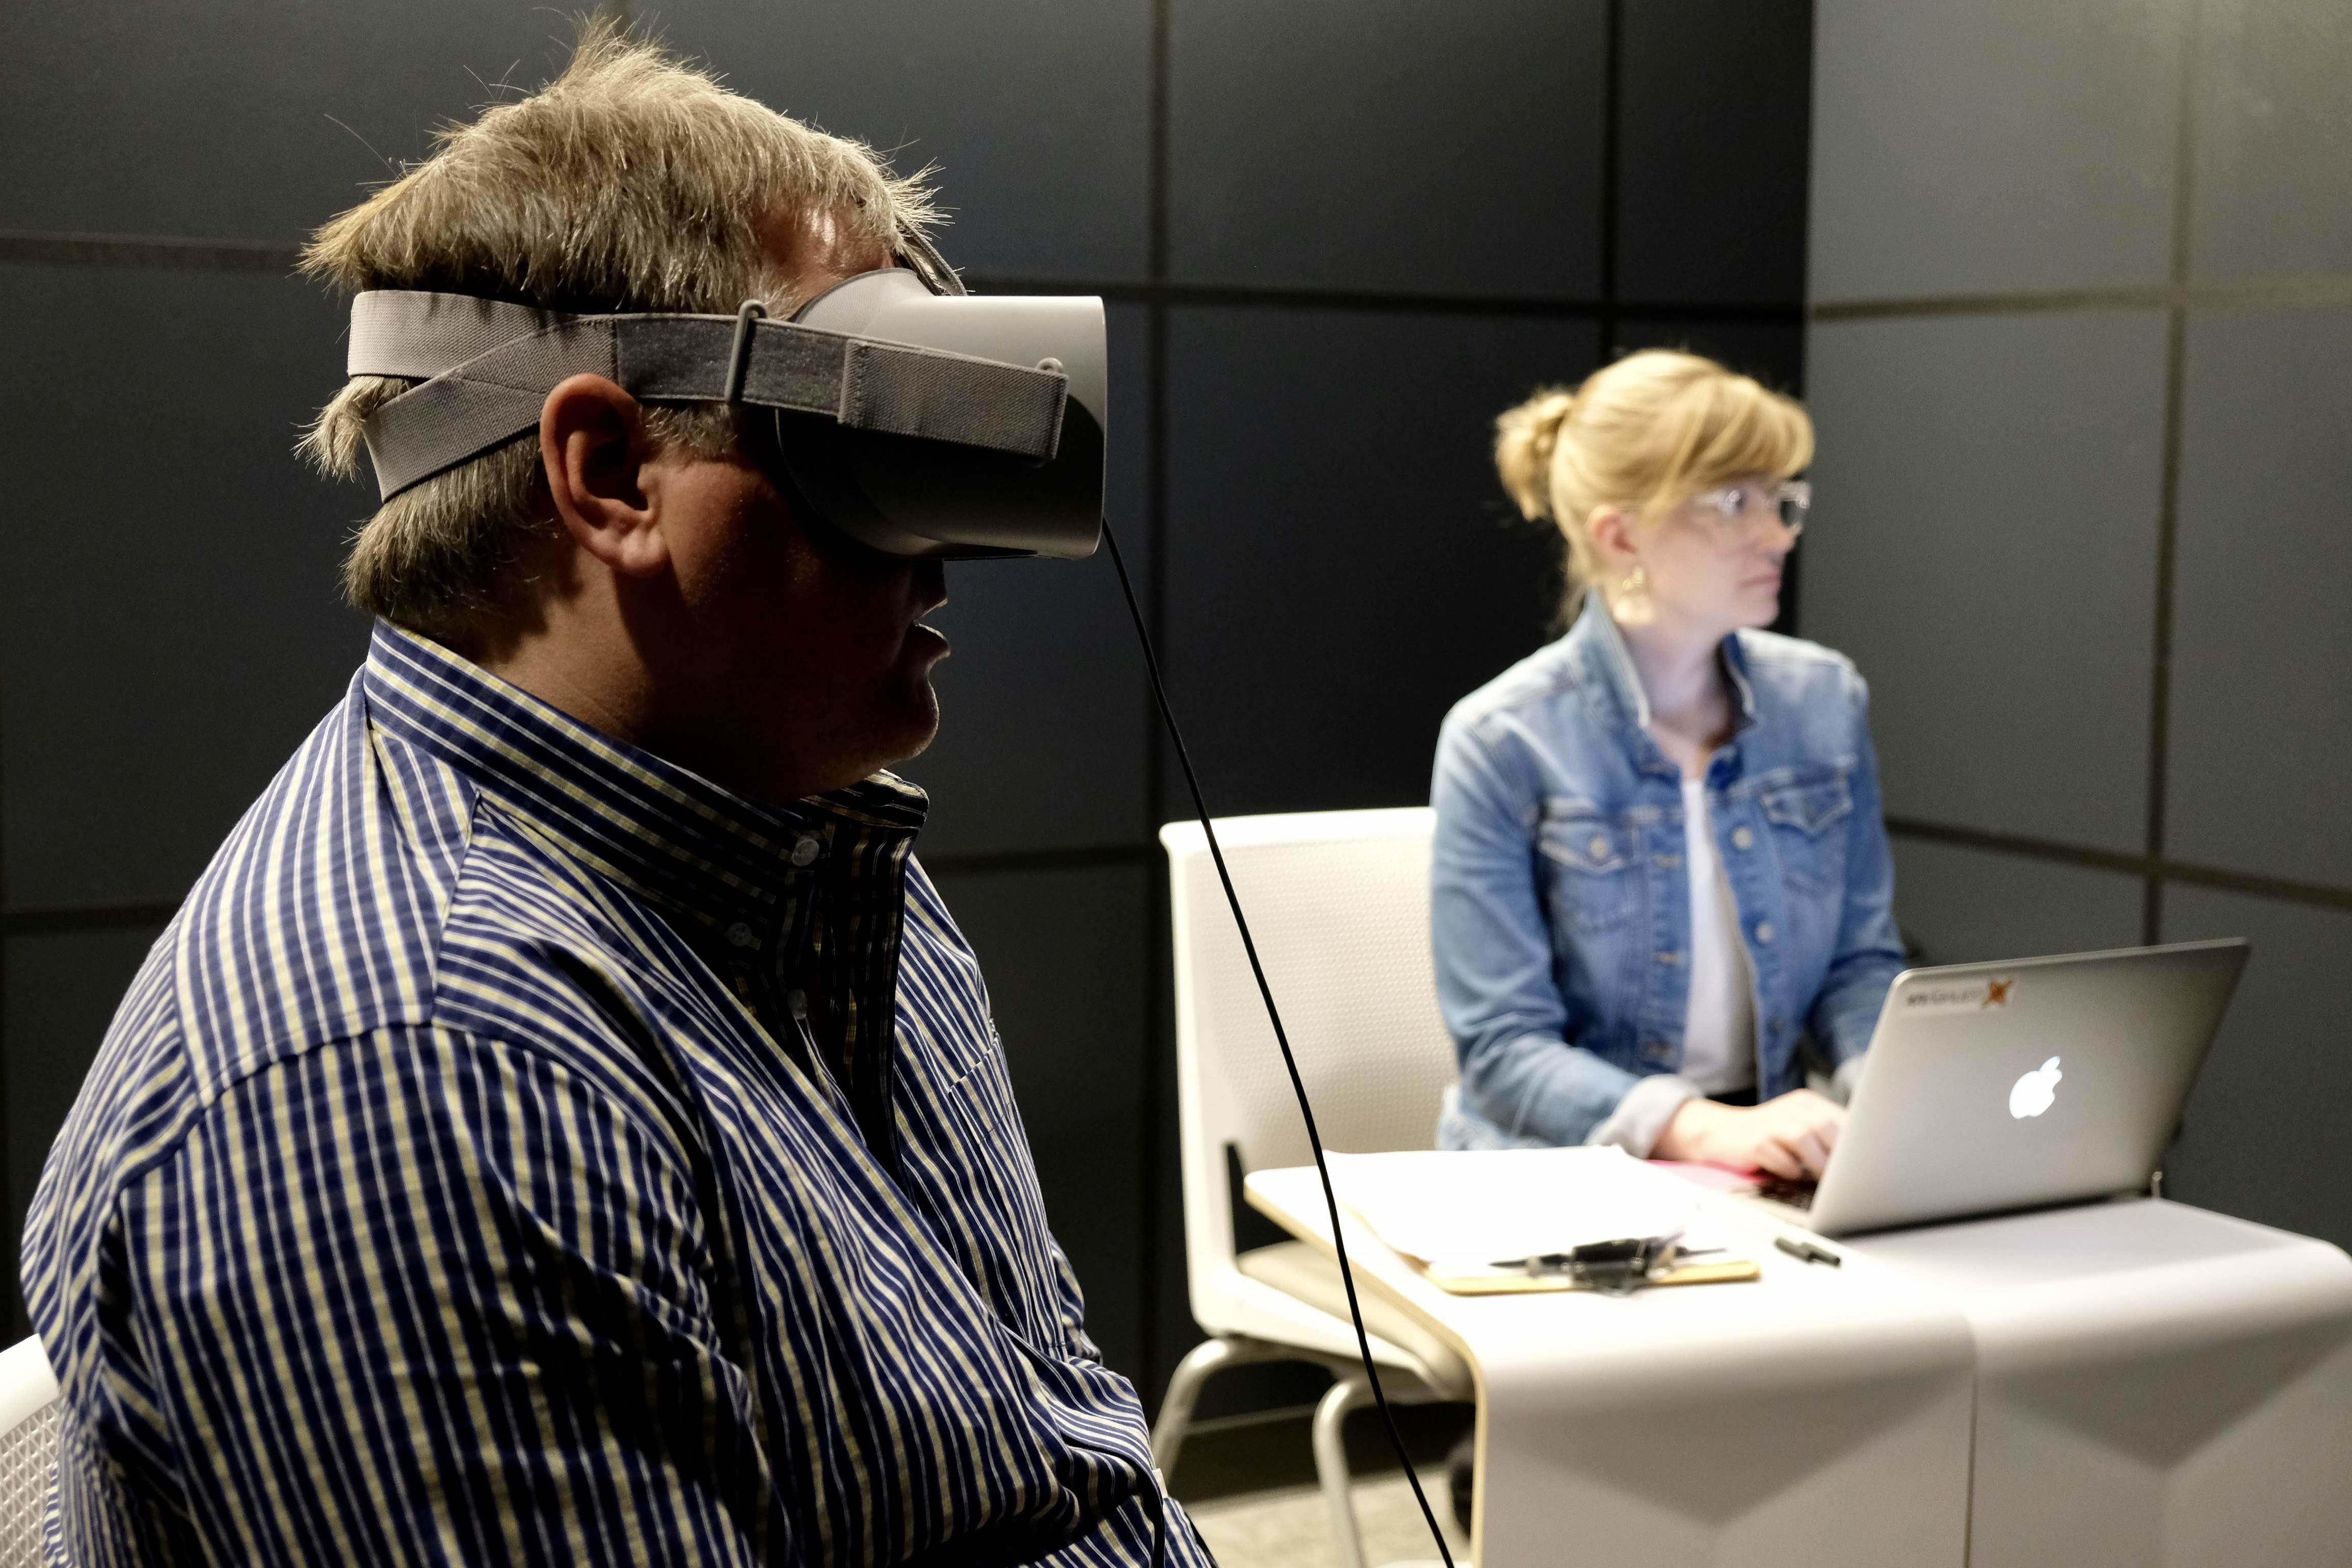 Man wearing virtual reality headset undergoing user research testing.